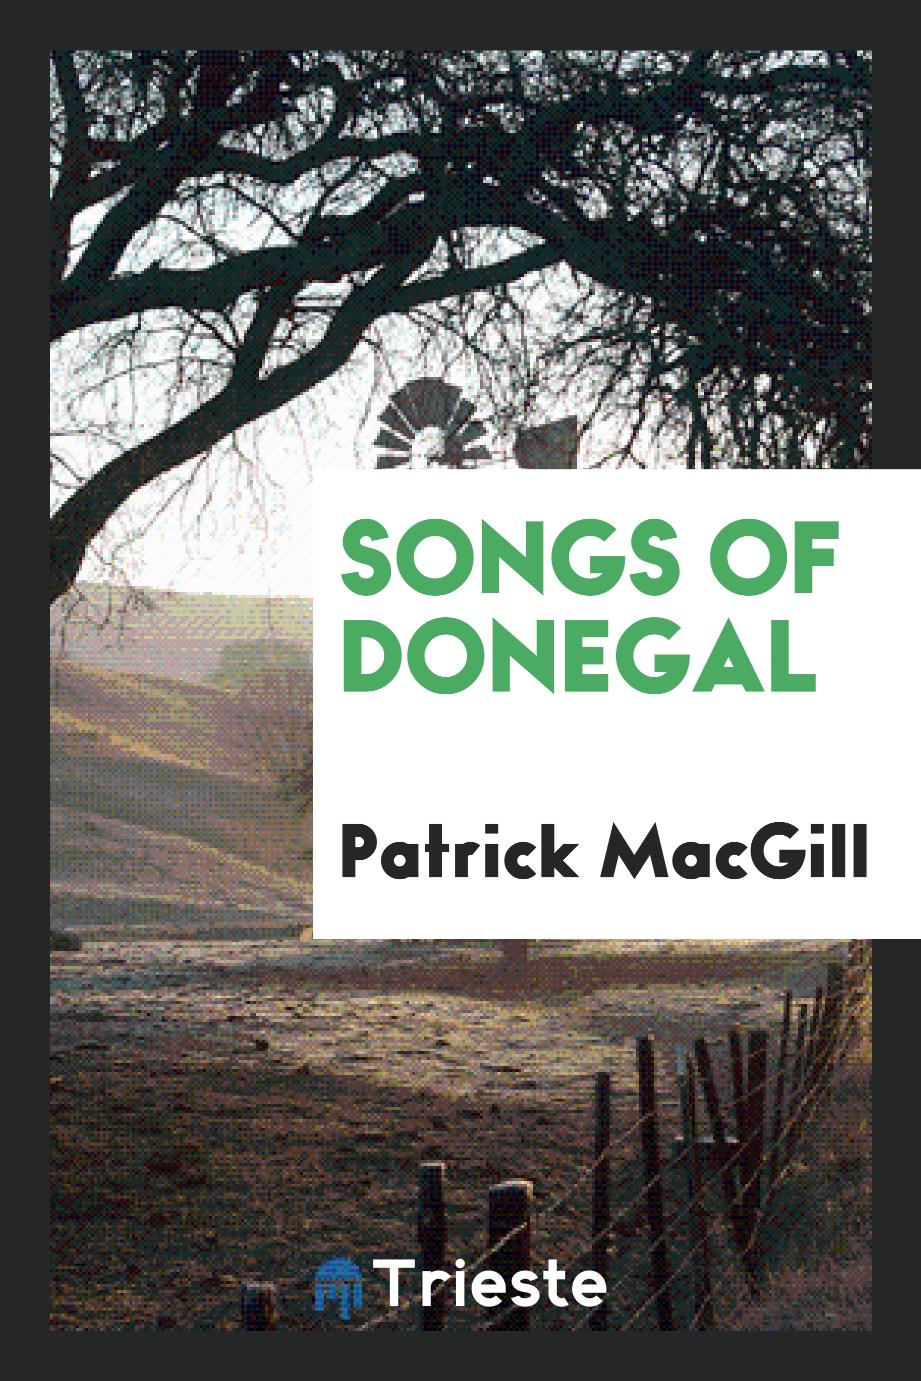 Songs of Donegal